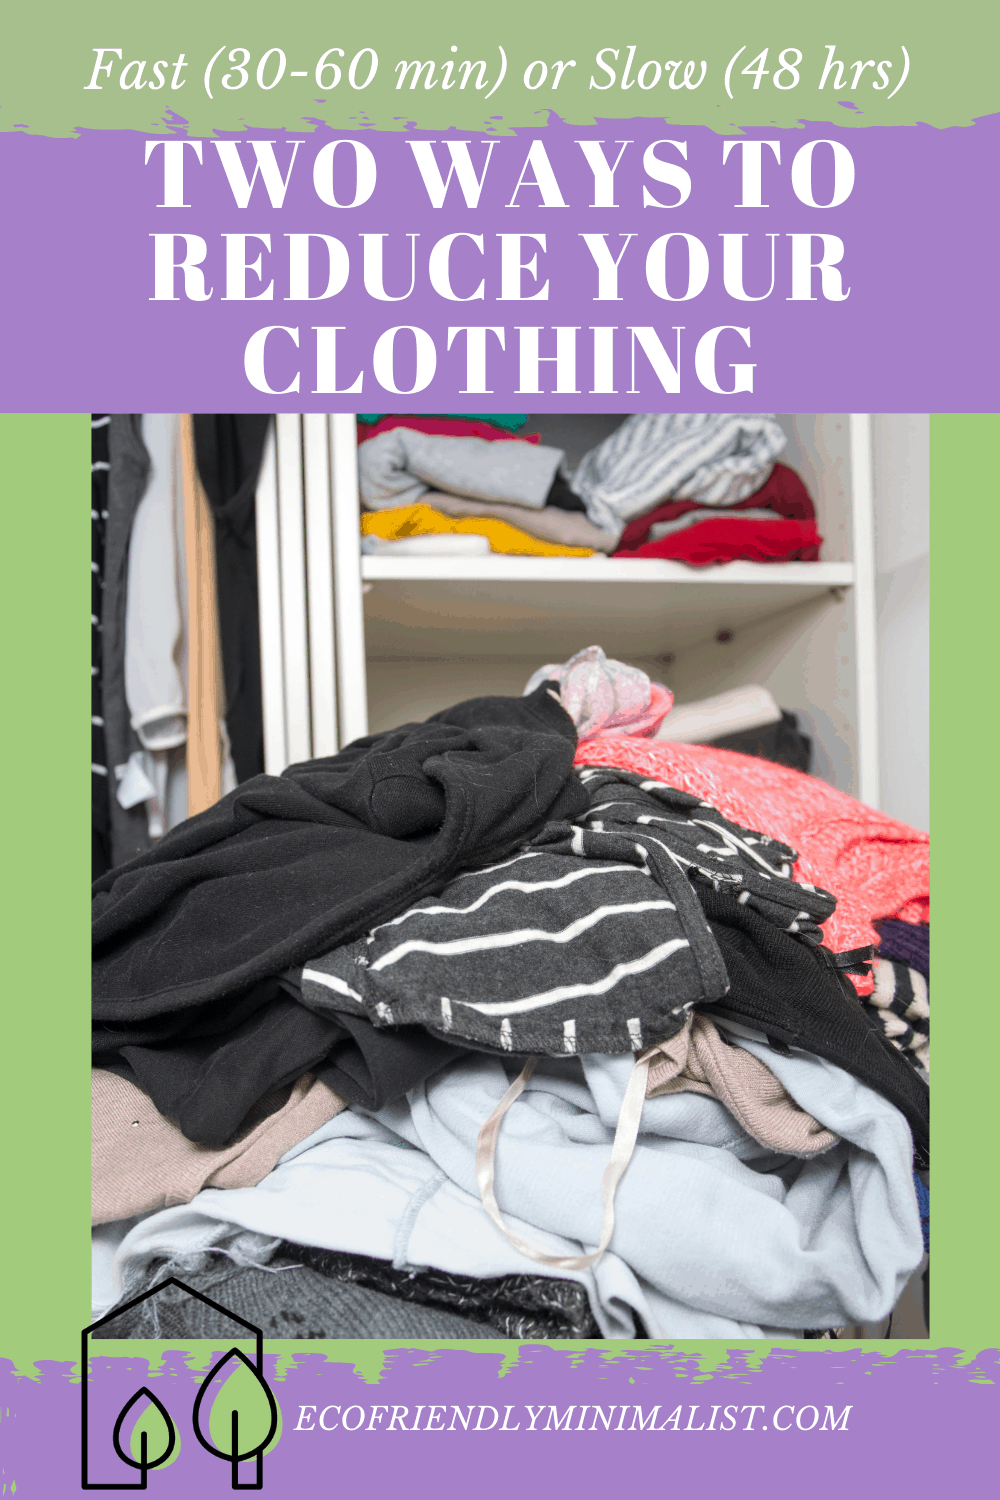 2 WAYS TO REDUCE YOUR CLOTHING - Fast or Slow - Eco-Friendly Minimalist